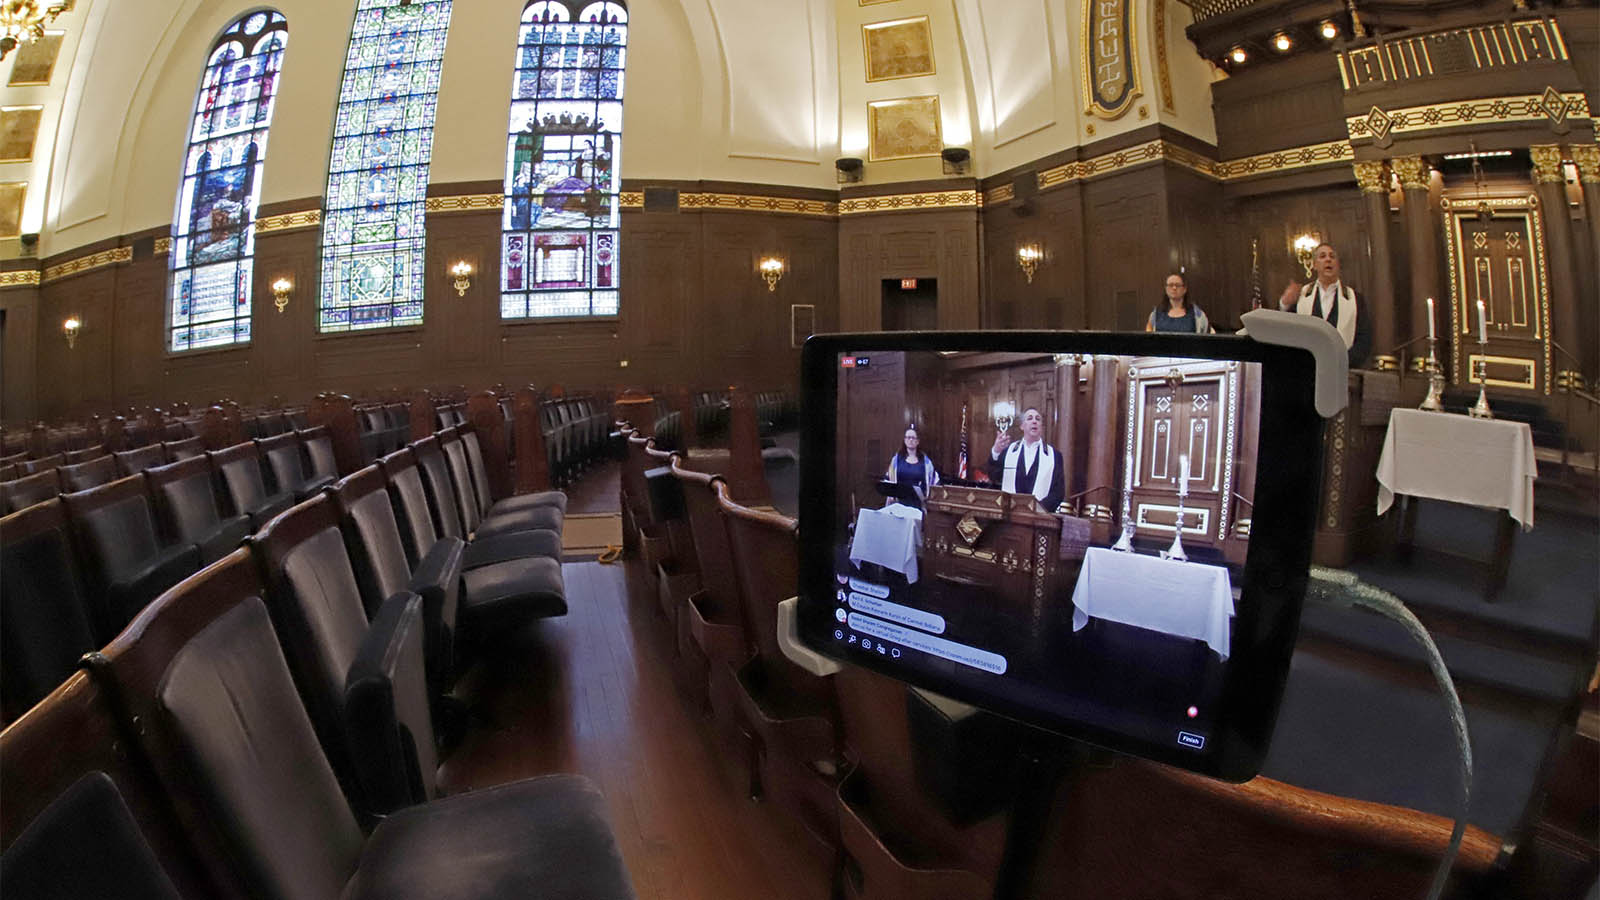 Rodef Shalom Rabbi Aaron Bisno, right, delivers his sermon during an Erev Shabbat service that is being streamed live on Facebook, Friday, March 20, 2020. (AP Photo/Gene J. Puskar)